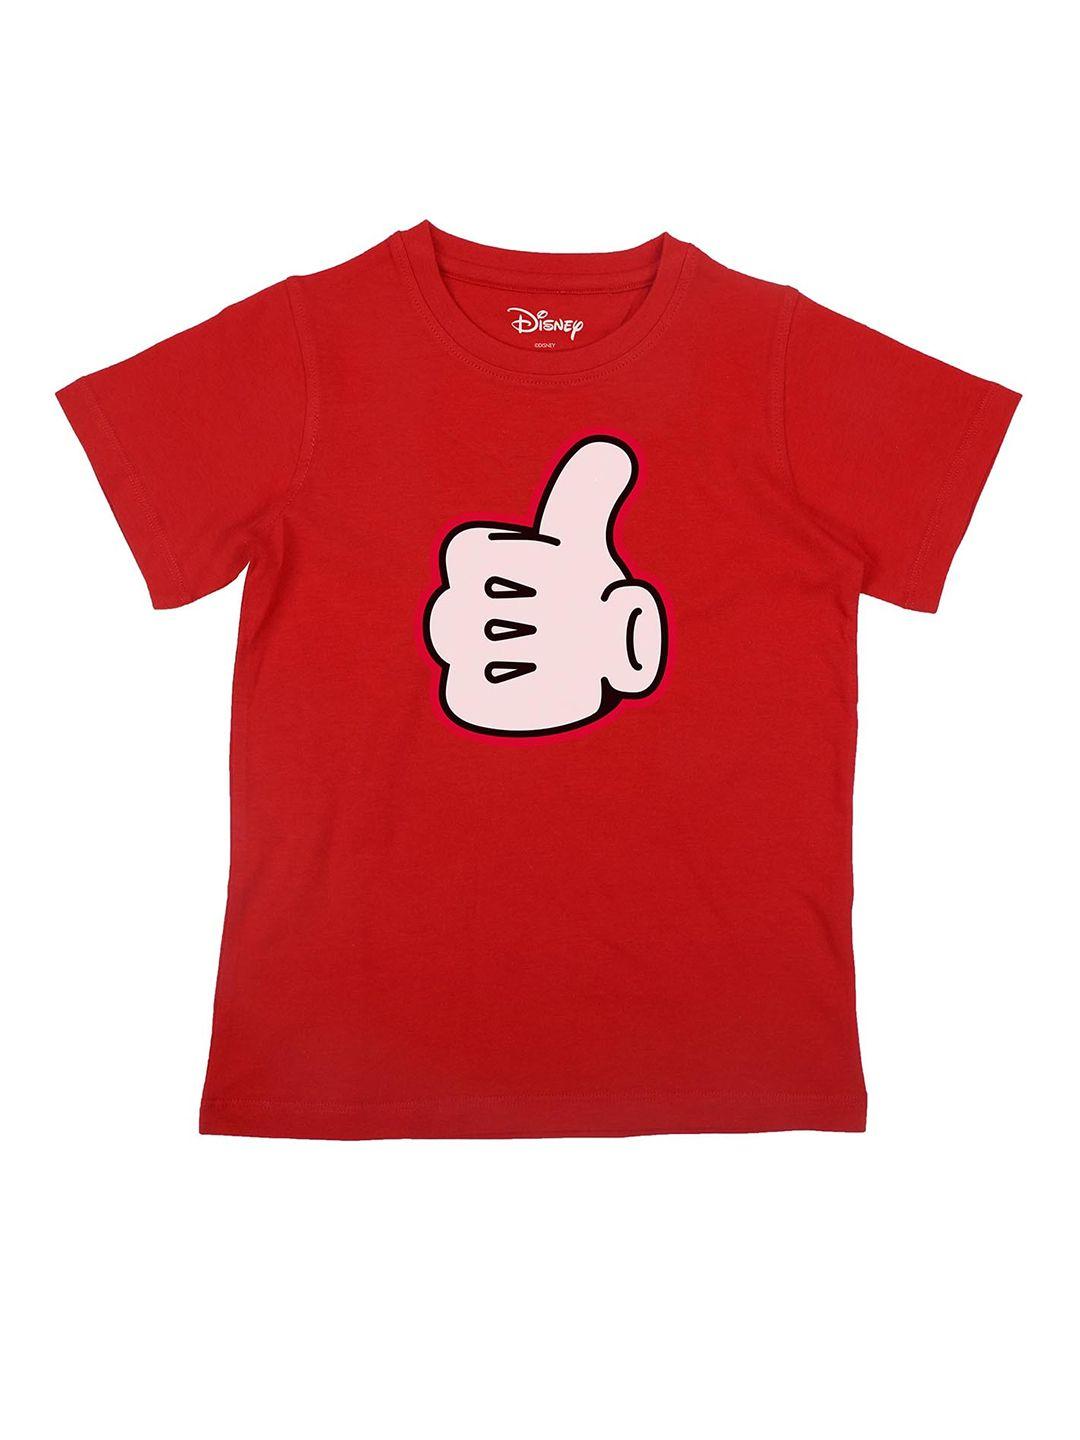 disney by wear your mind boys red printed cotton pure cotton t-shirt